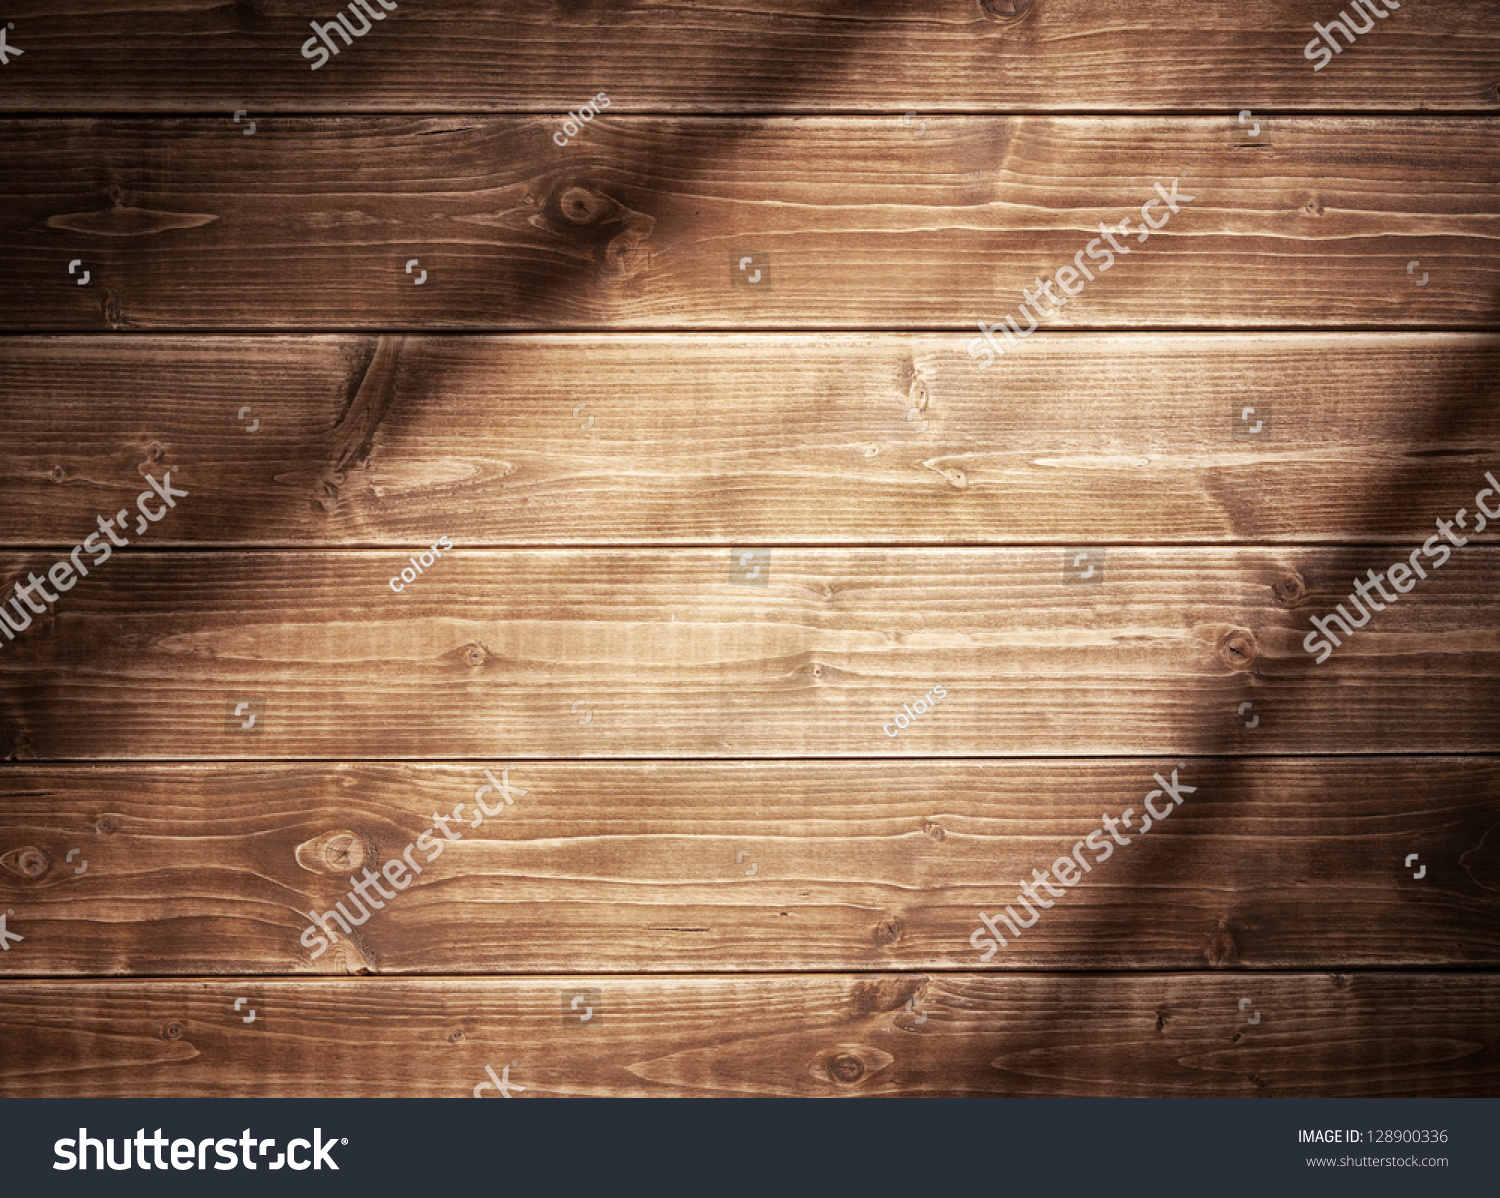 Wooden wall background in a evening light. With shadows from a window frame. #128900336